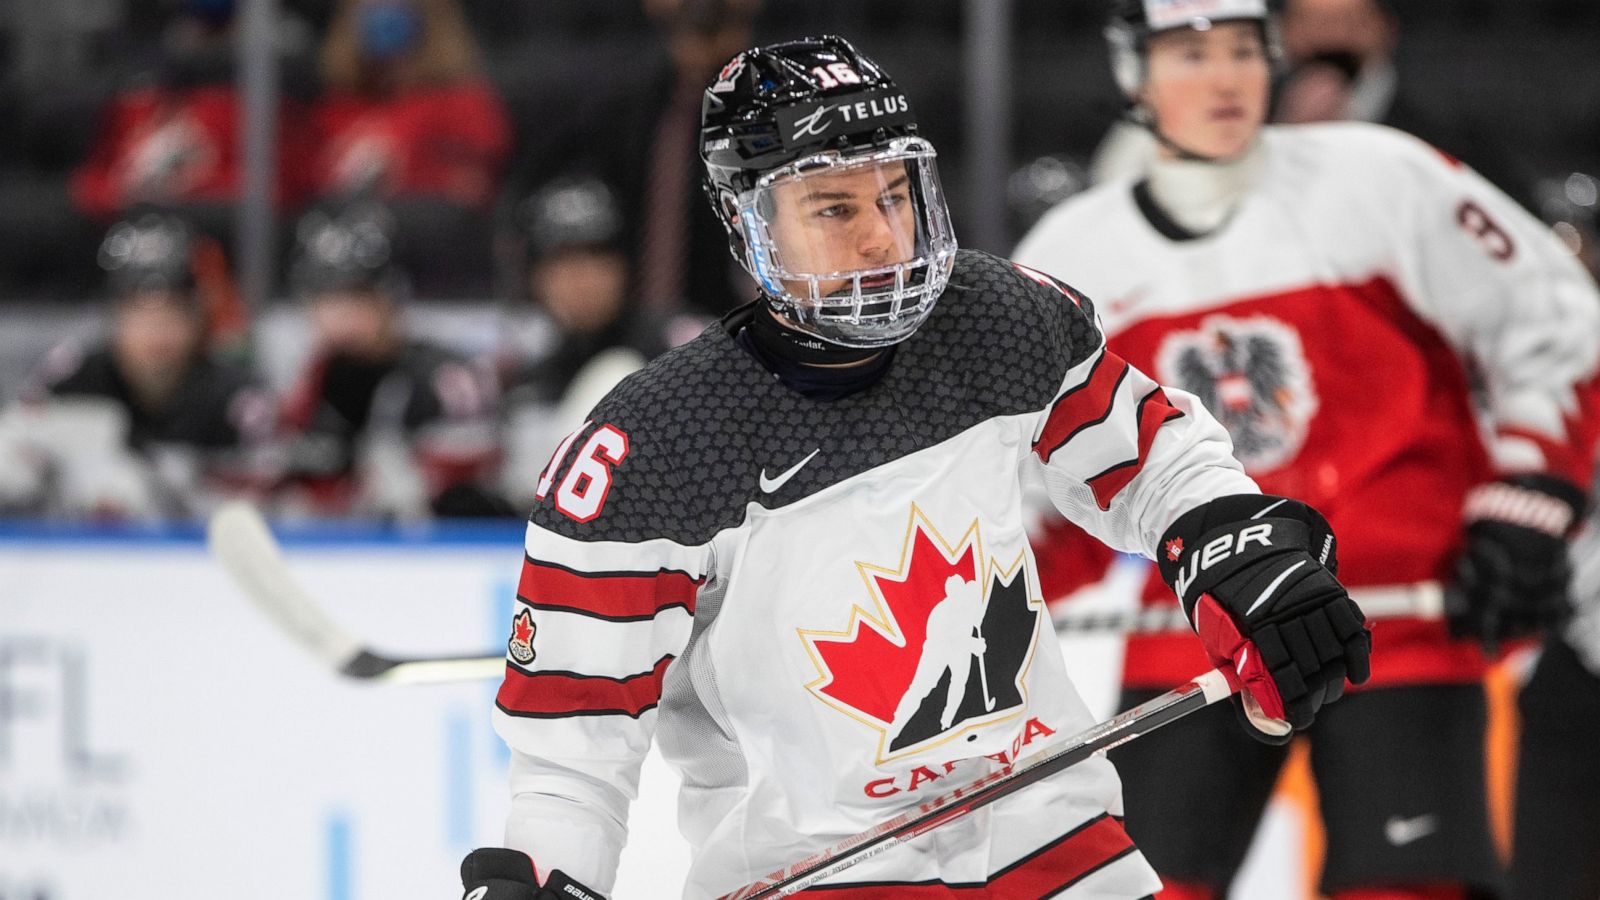 Bedard, youngest to score 4 goals in world juniors game